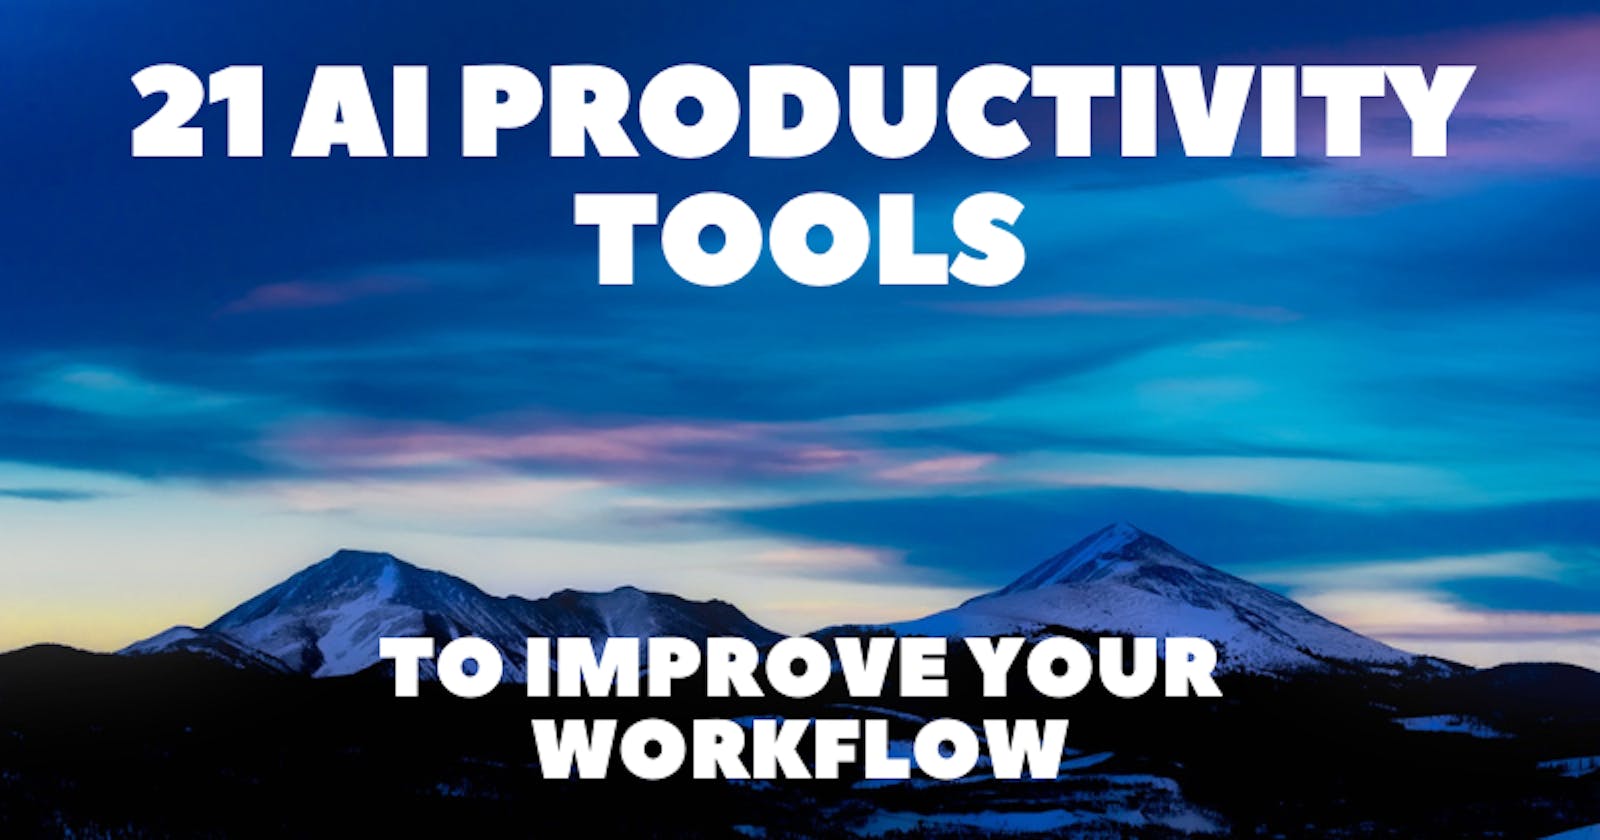 21 AI Productivity Tools to Improve Your Workflow 🔥🚀